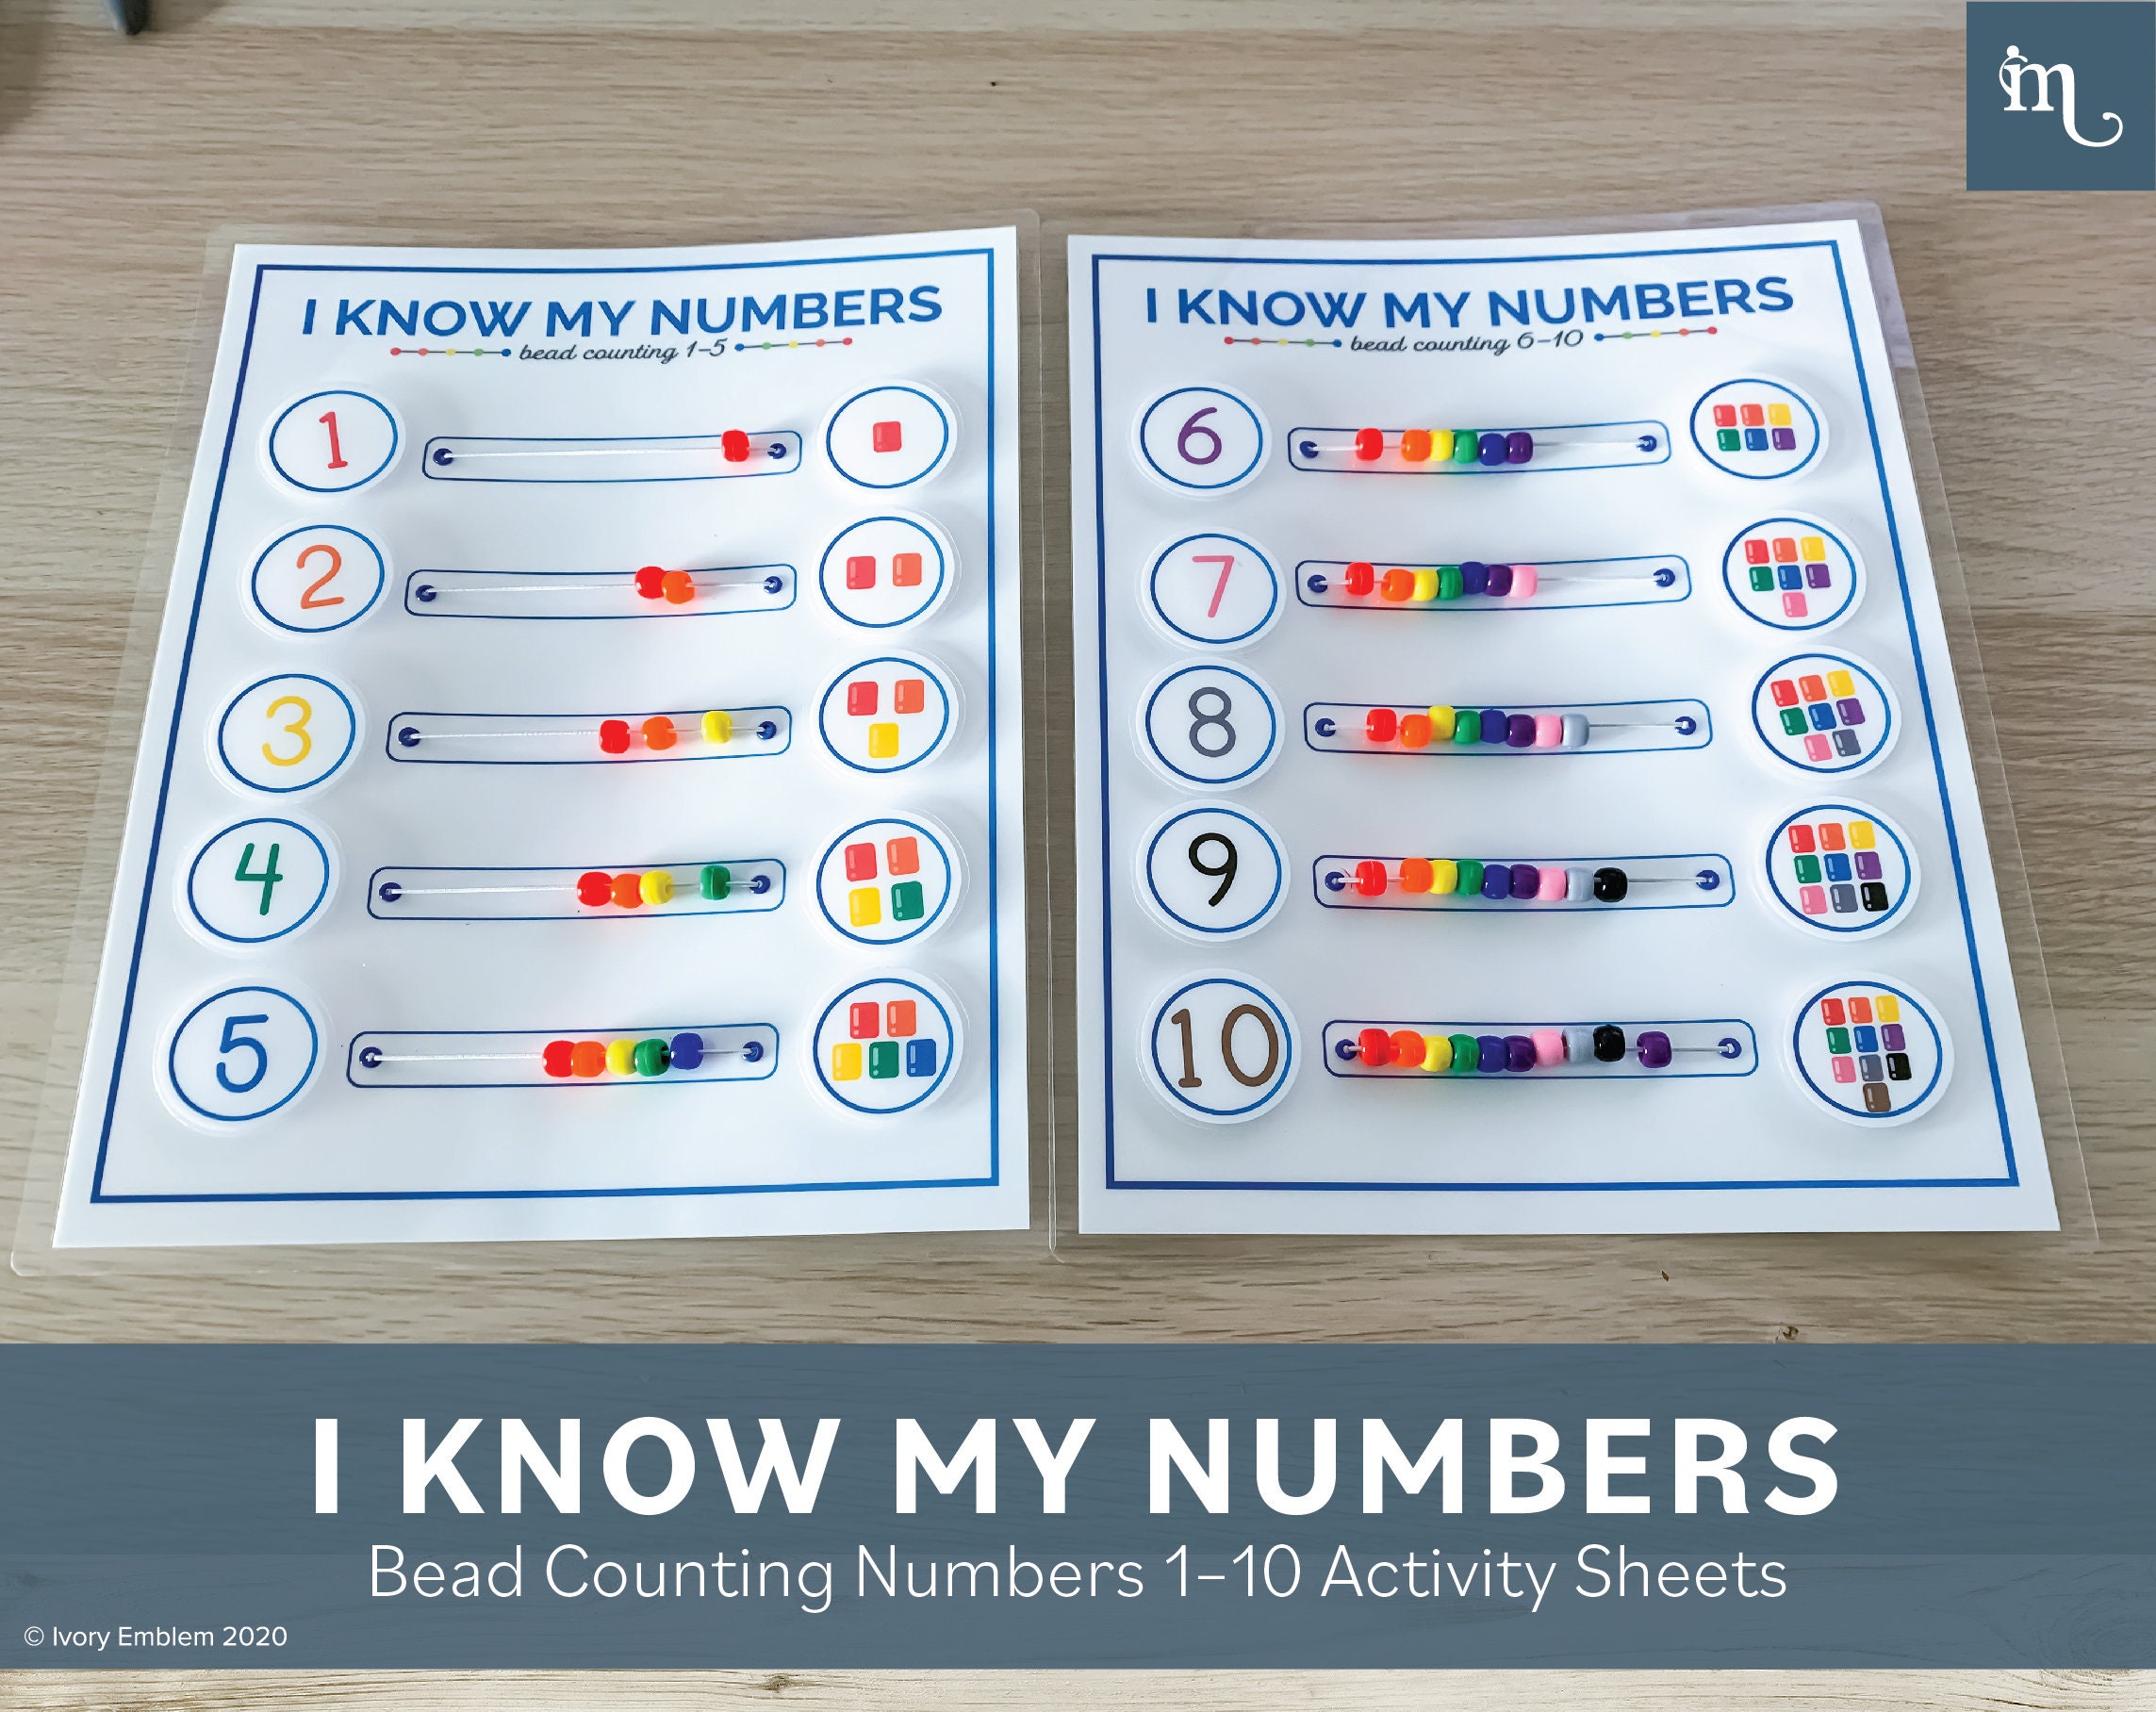 i-know-my-numbers-bead-counting-activity-sheet-busy-etsy